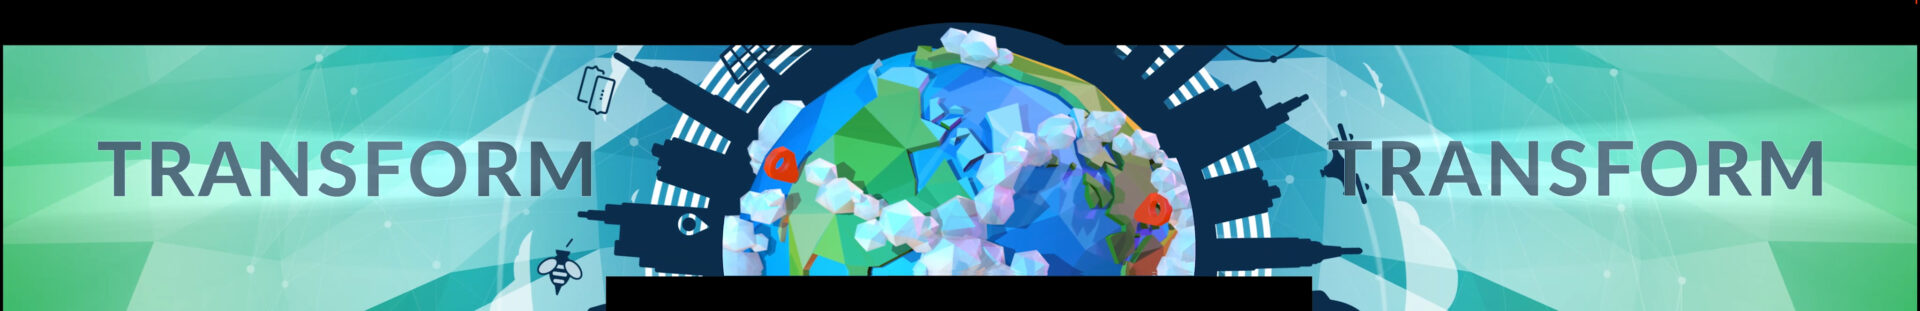 A stage mockup of the event presentation design for DevOps World 2018. It depicts a stylized globe with a 2-D city silhouette around it.